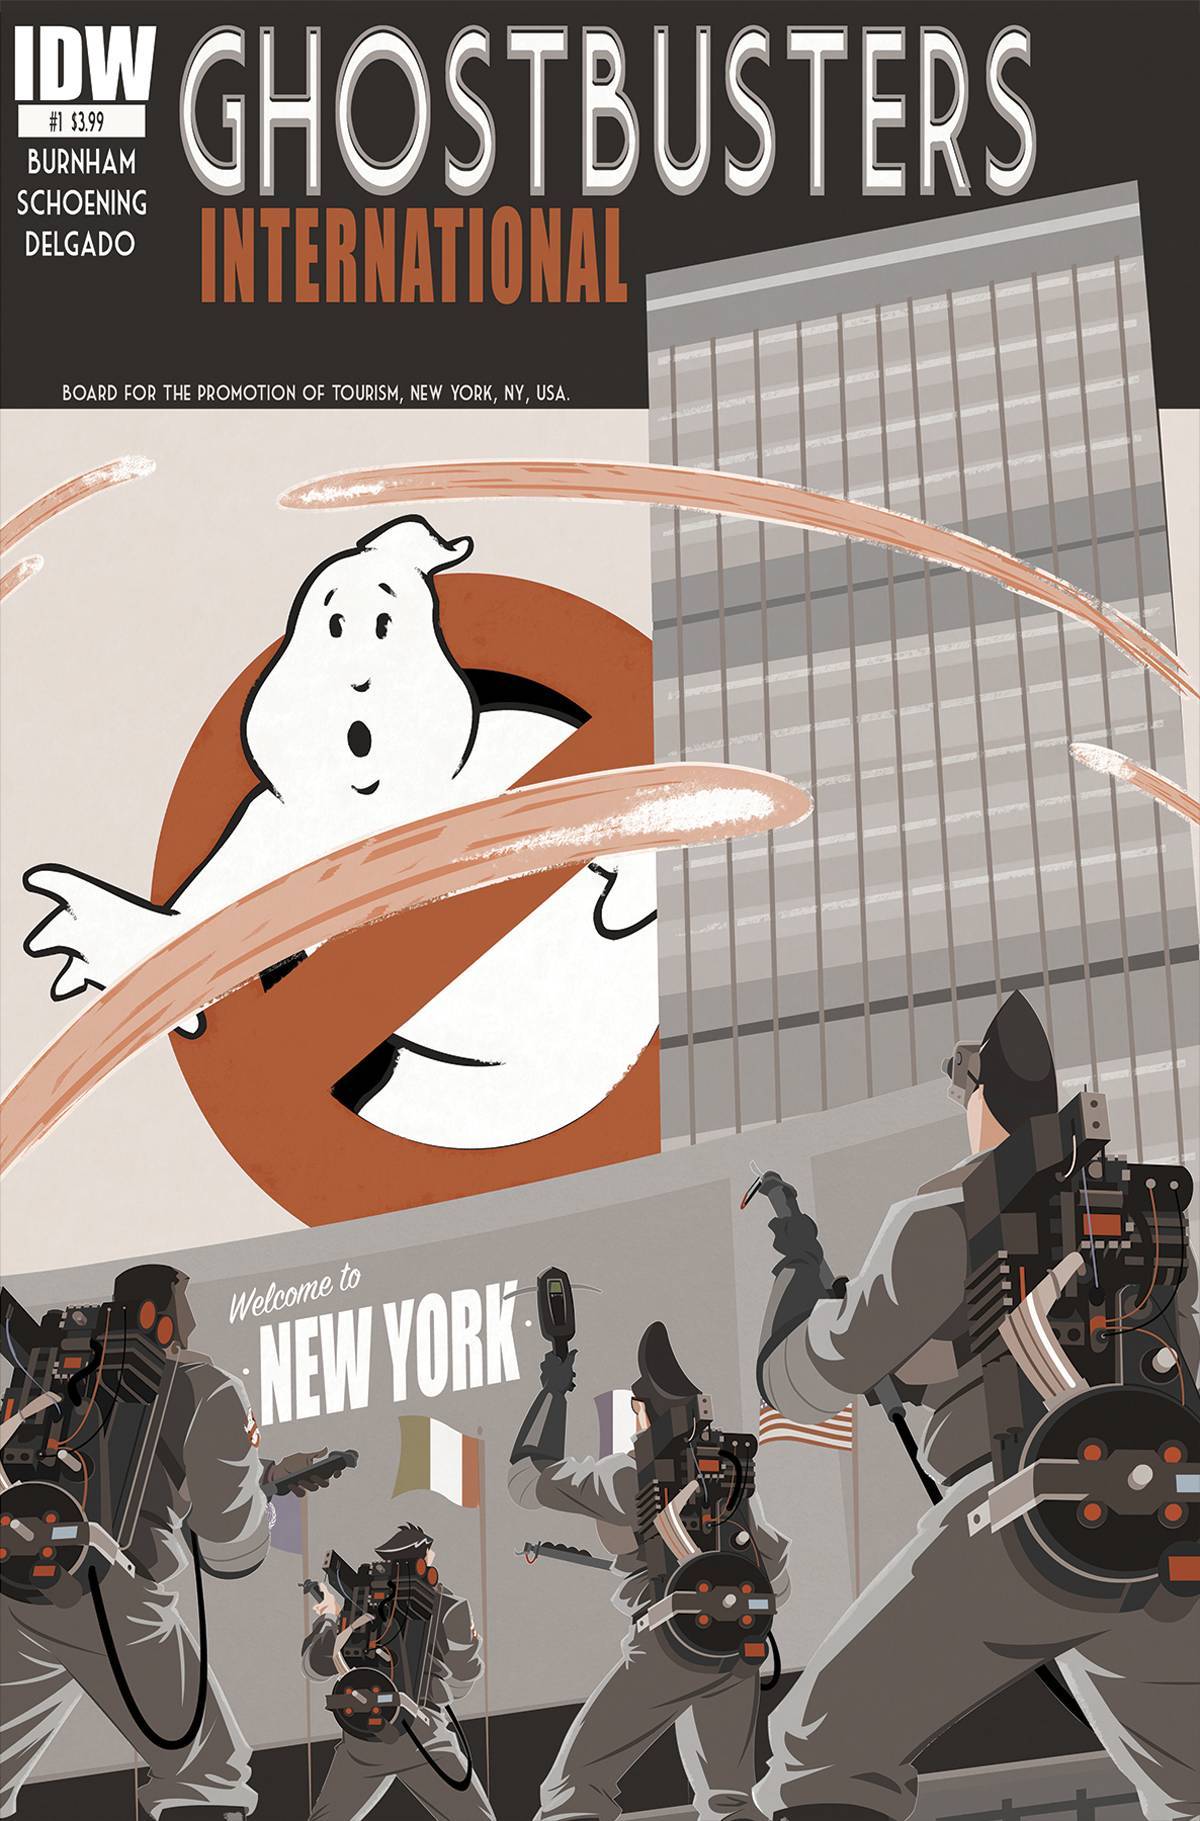 Ghostbusters International #1Peter, Egon, Ray and Winston are leaving the Big Apple behind to chase a haunting mystery around the world! Look for your copy of Ghostbusters International #1 (with art by local star Dan Schoening!), out Wednesday...